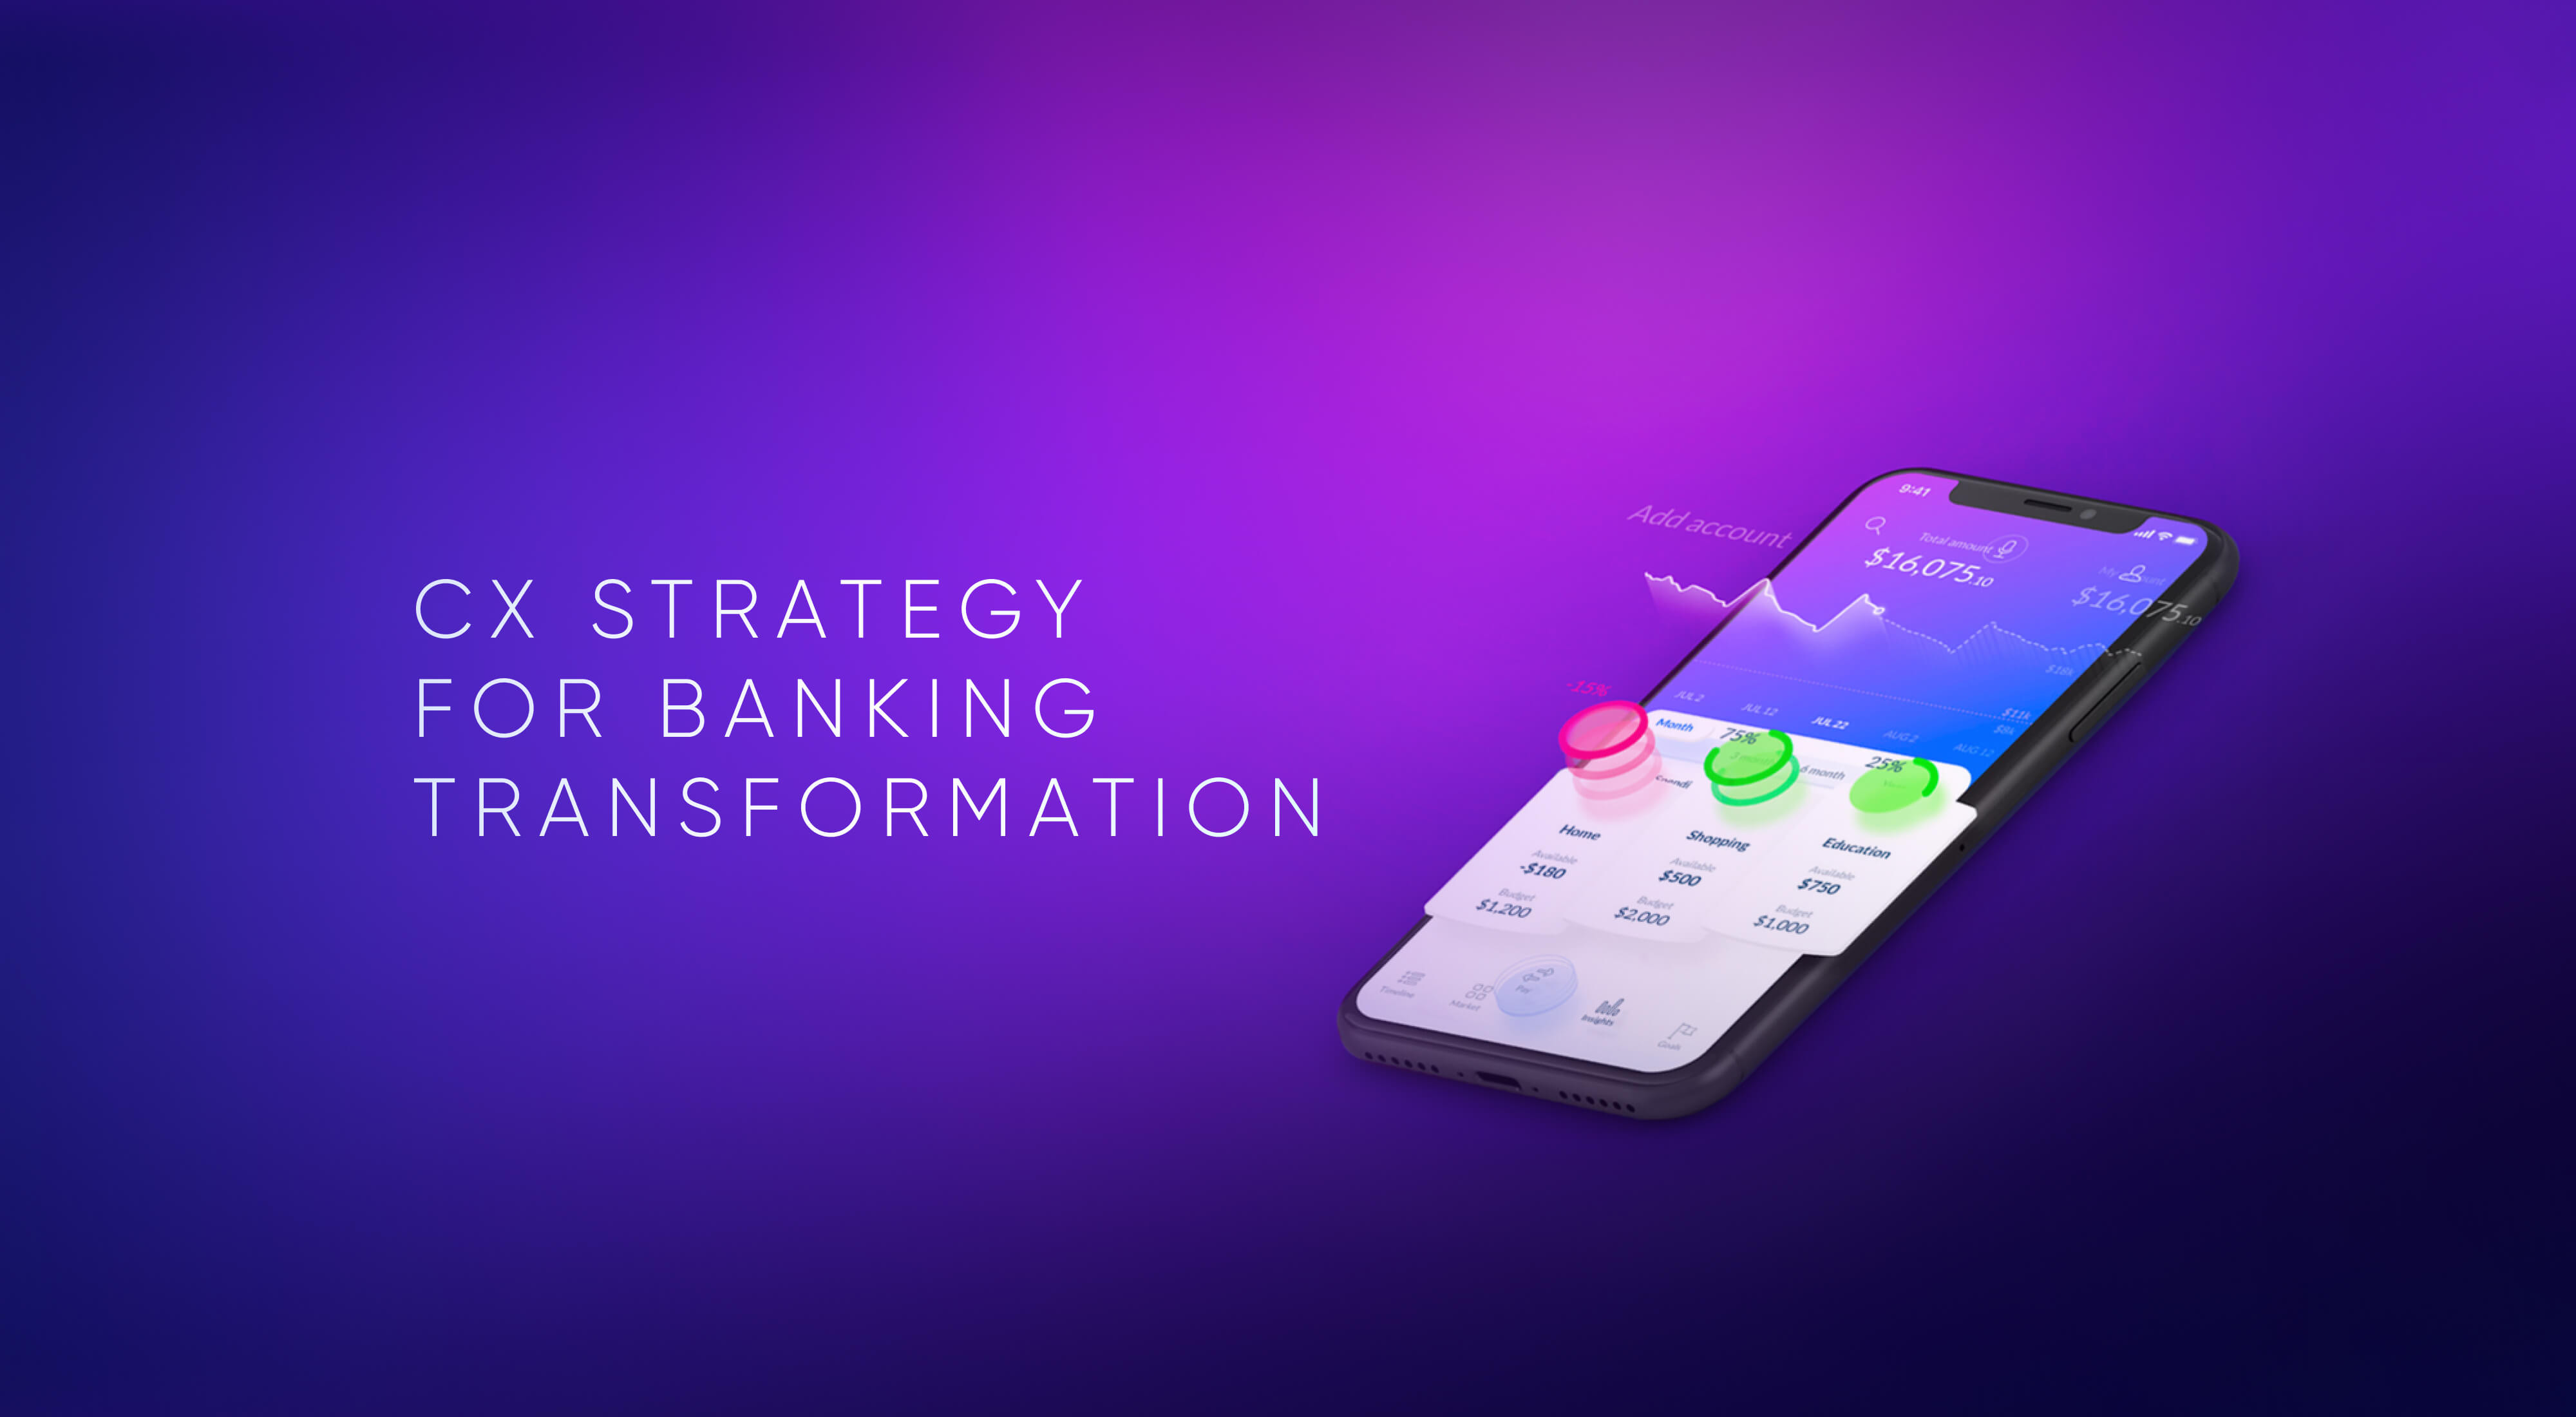 Digital Banking CX Strategy to Stay Ahead of the Competition